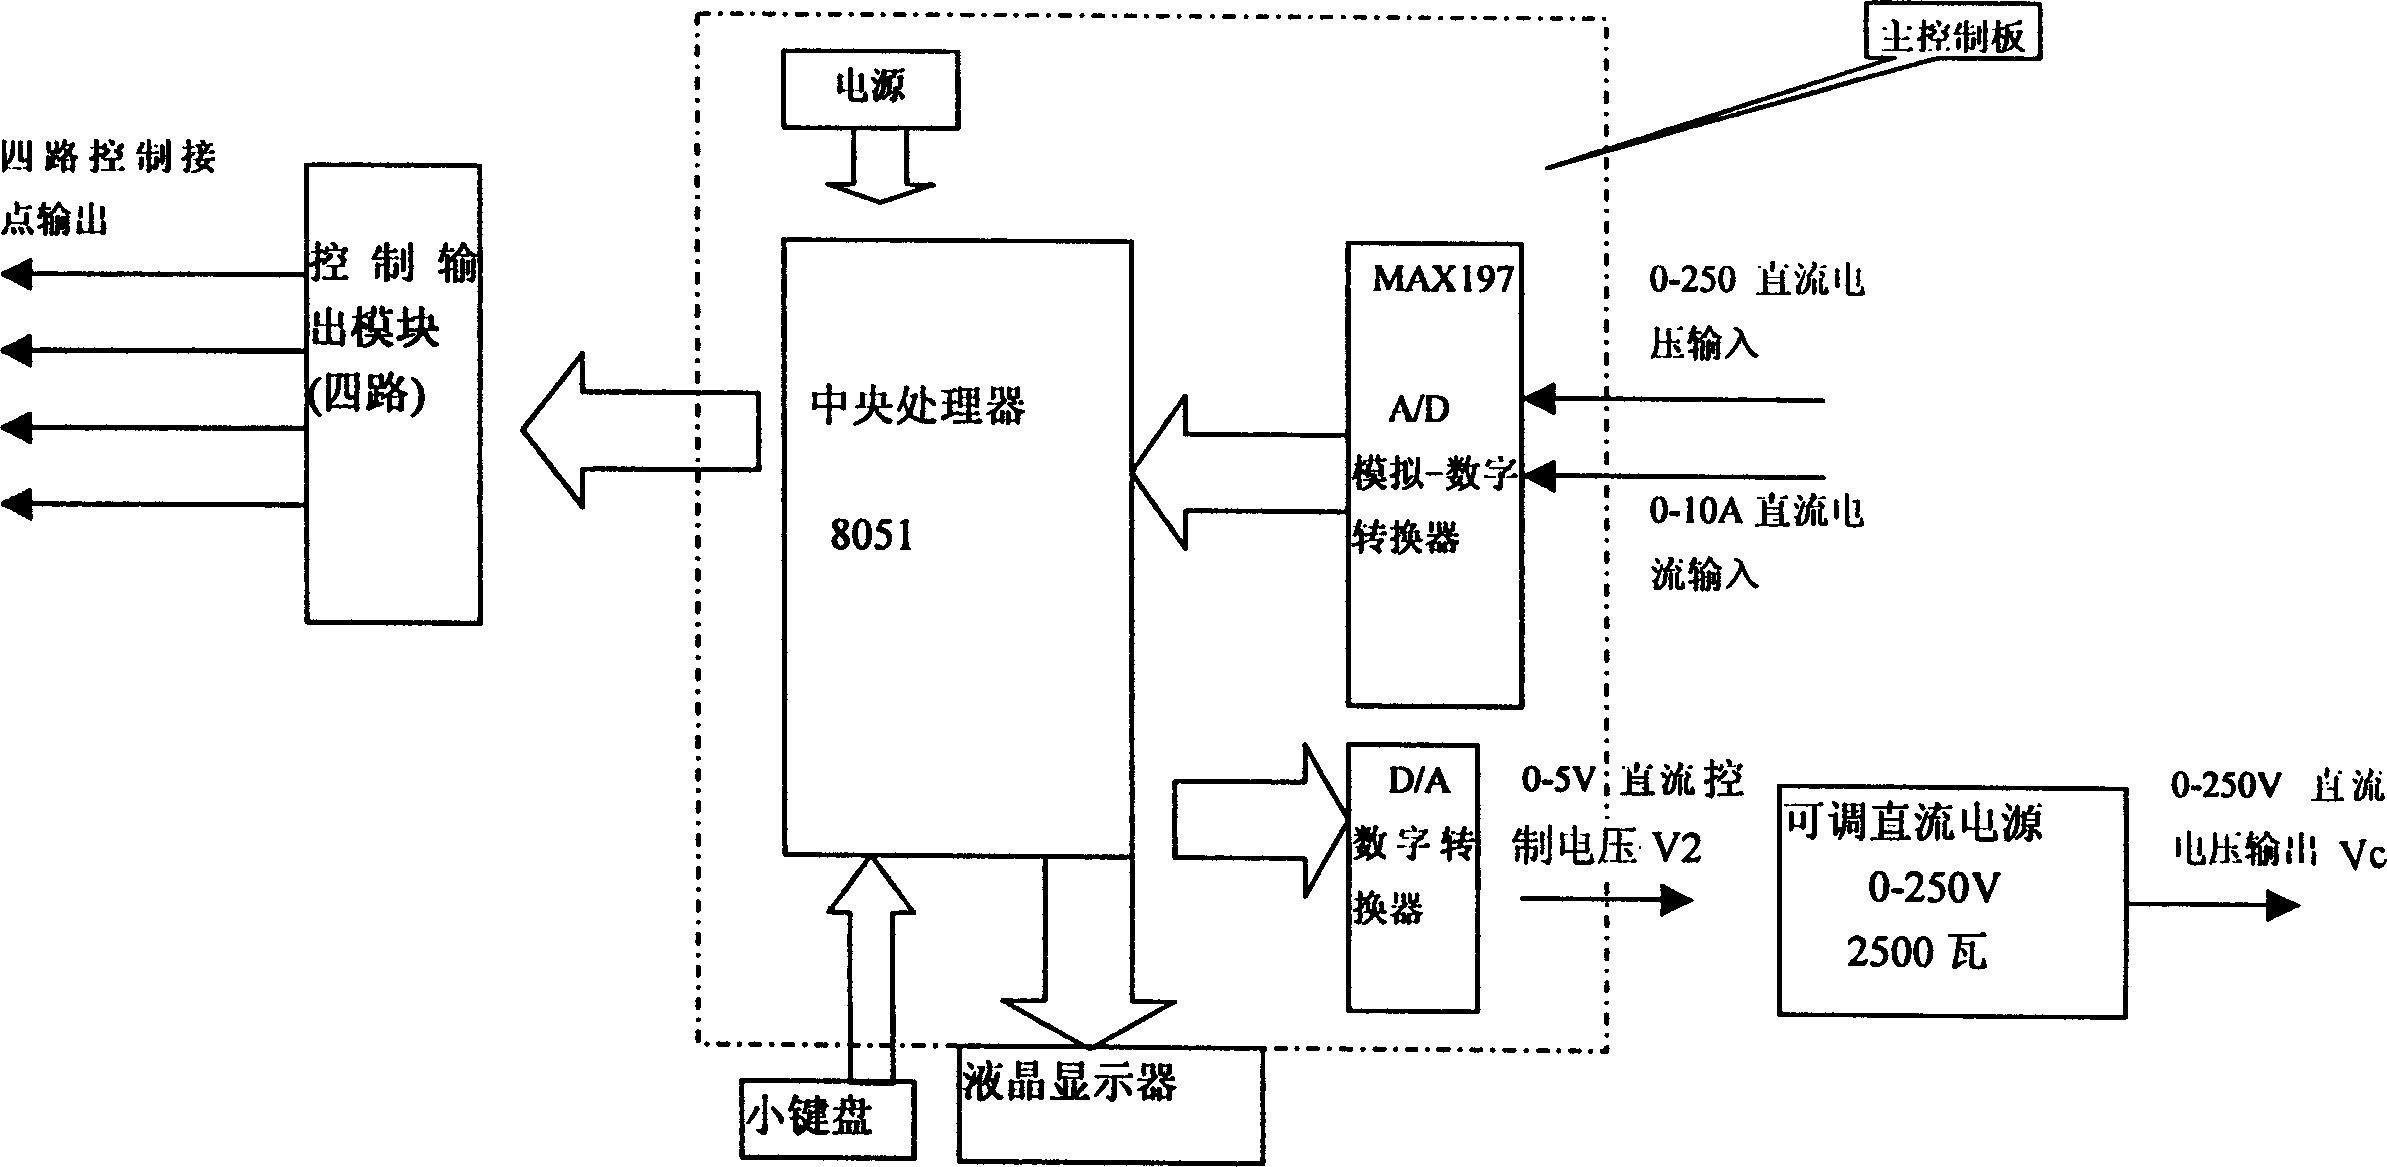 Comprehensive test instrument of electric system primary cut out